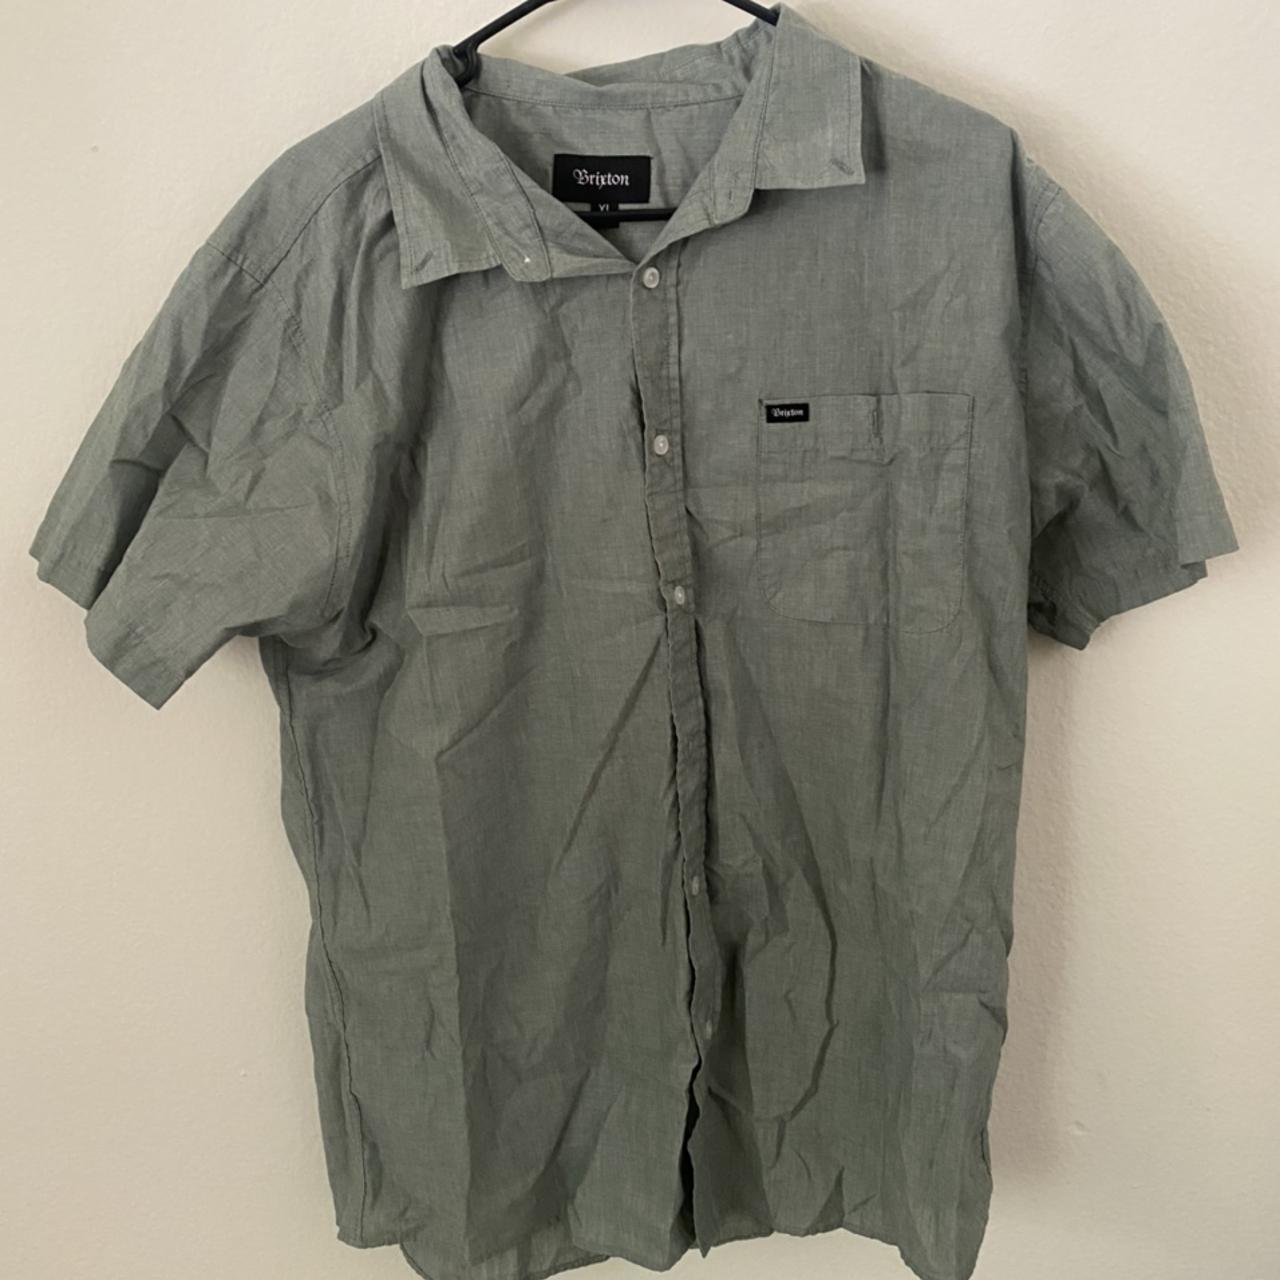 Product Image 1 - Brixton short sleeve button up